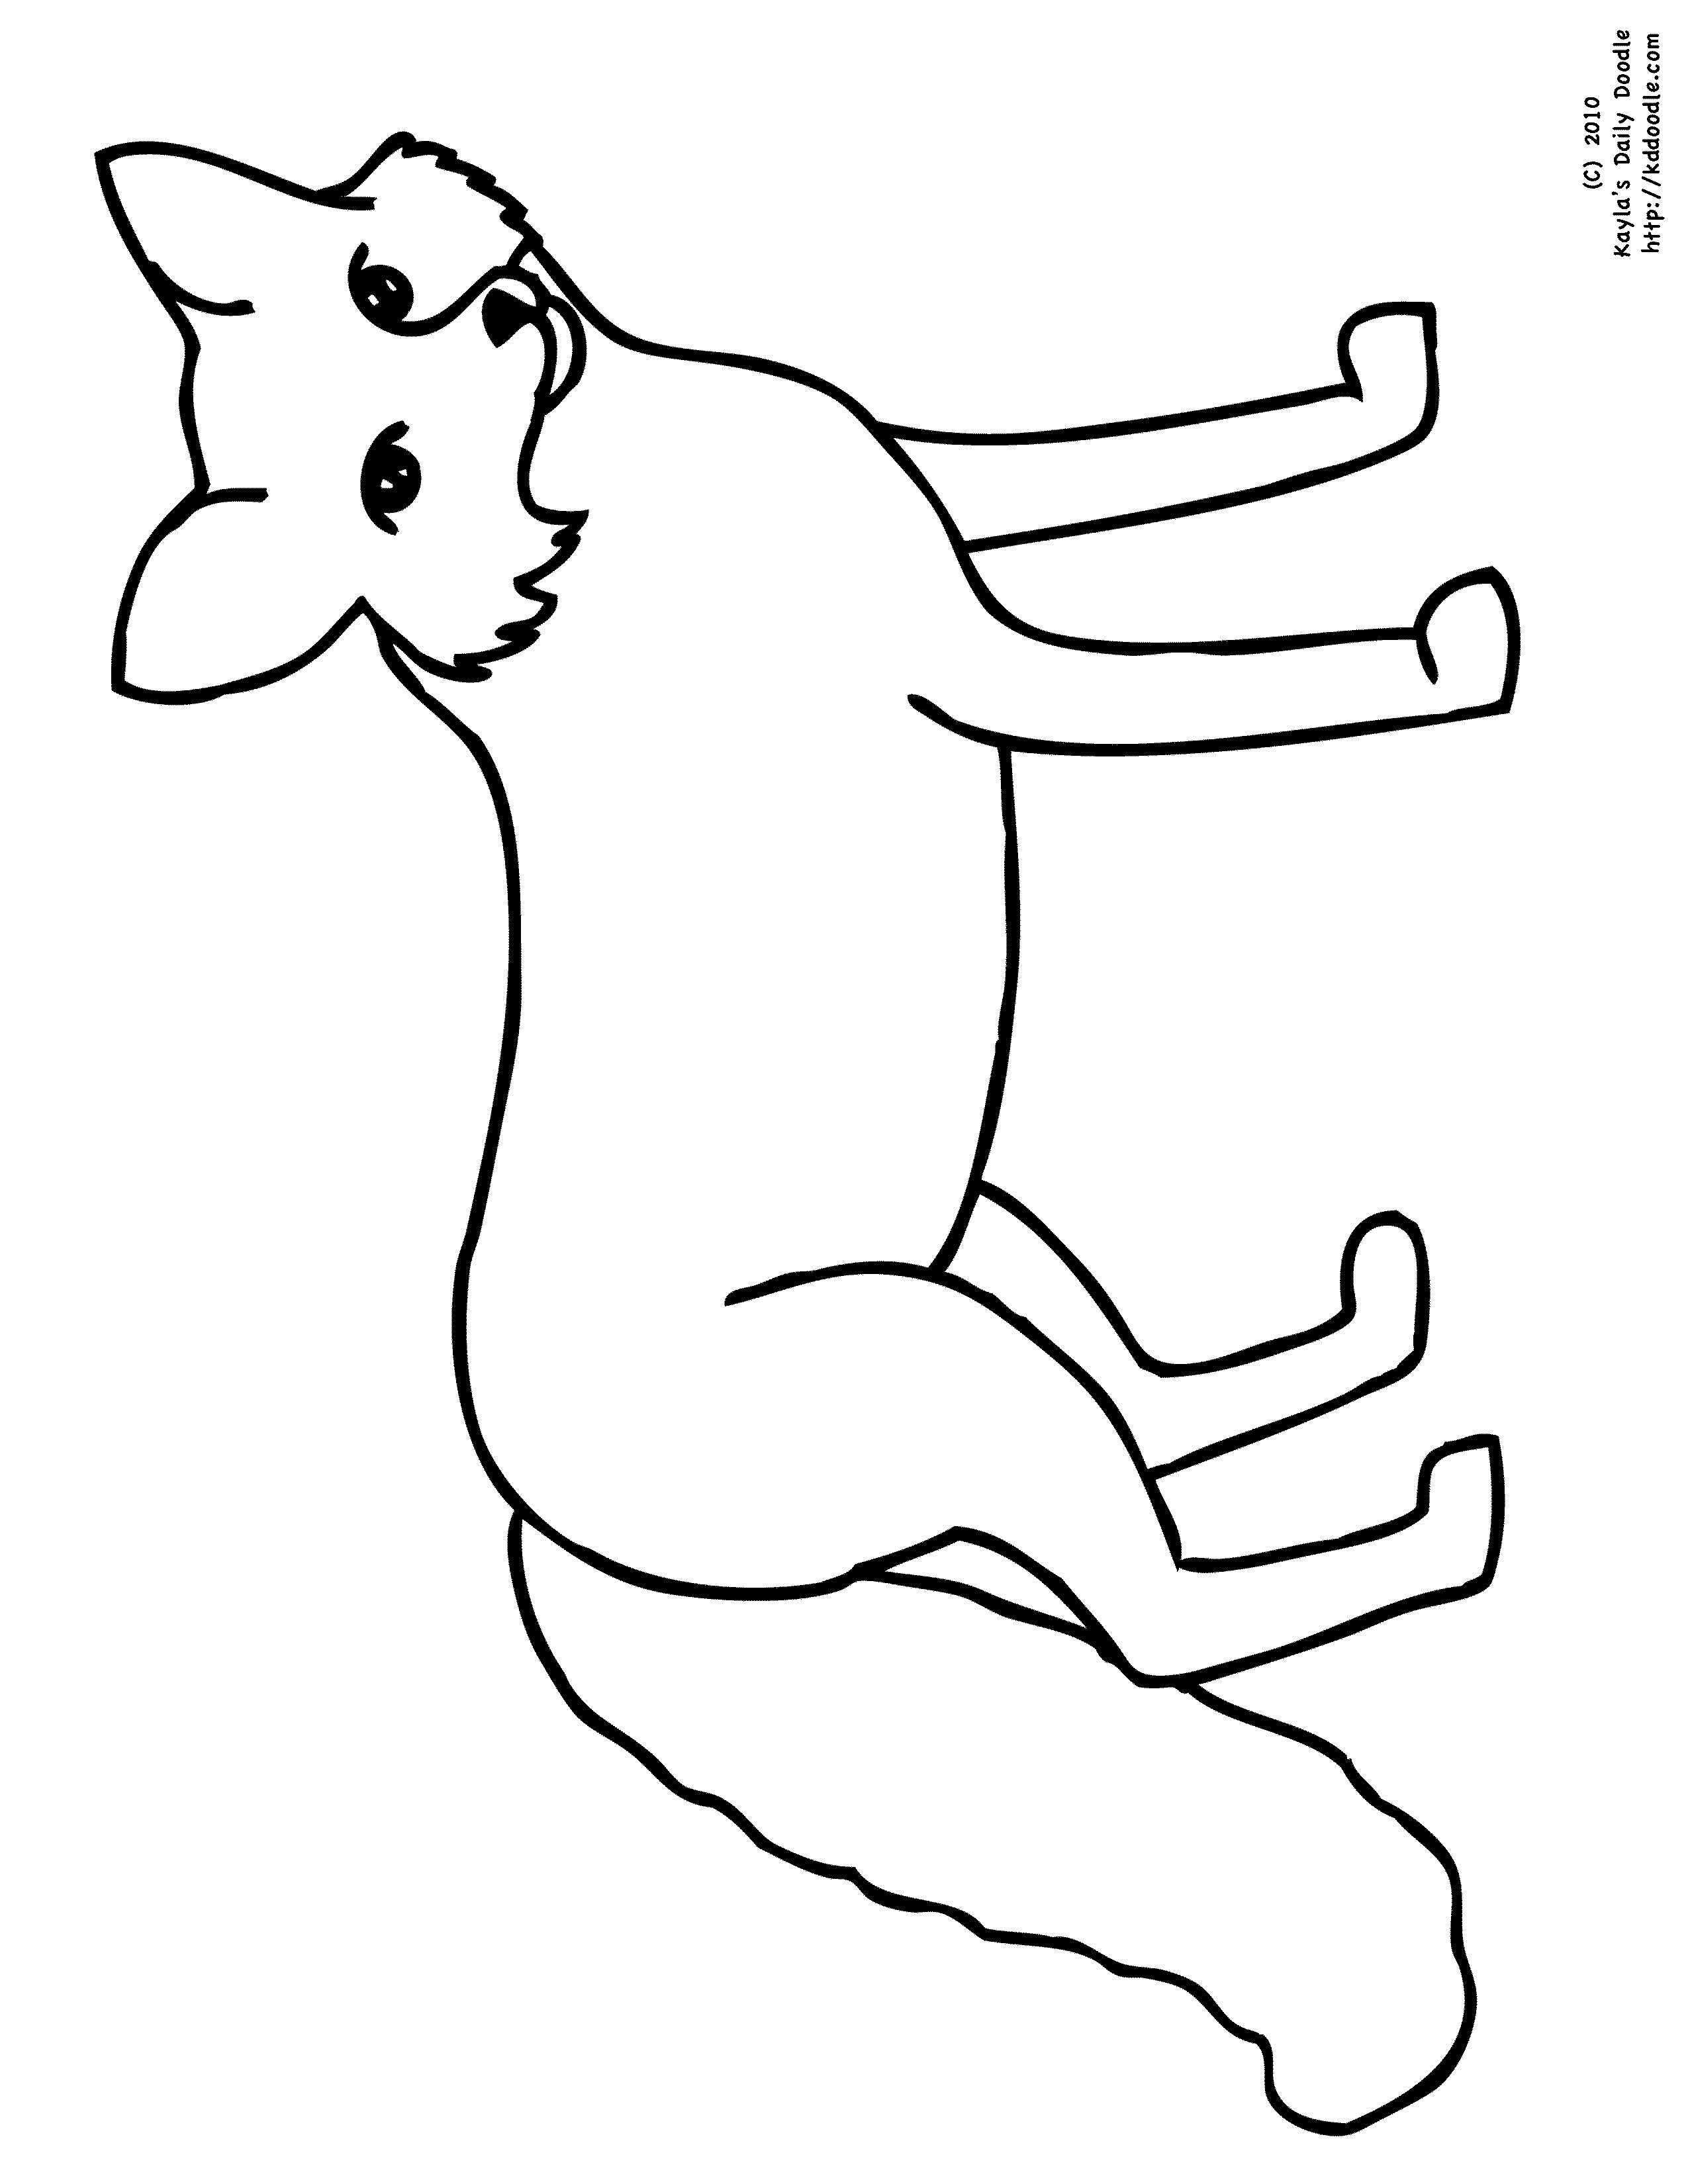 Free Printable Coloring Sheets Of Baby Animals With Big Eyes And Are Foxes
 Nos jeux de coloriage Renard à imprimer gratuit Page 3 of 3